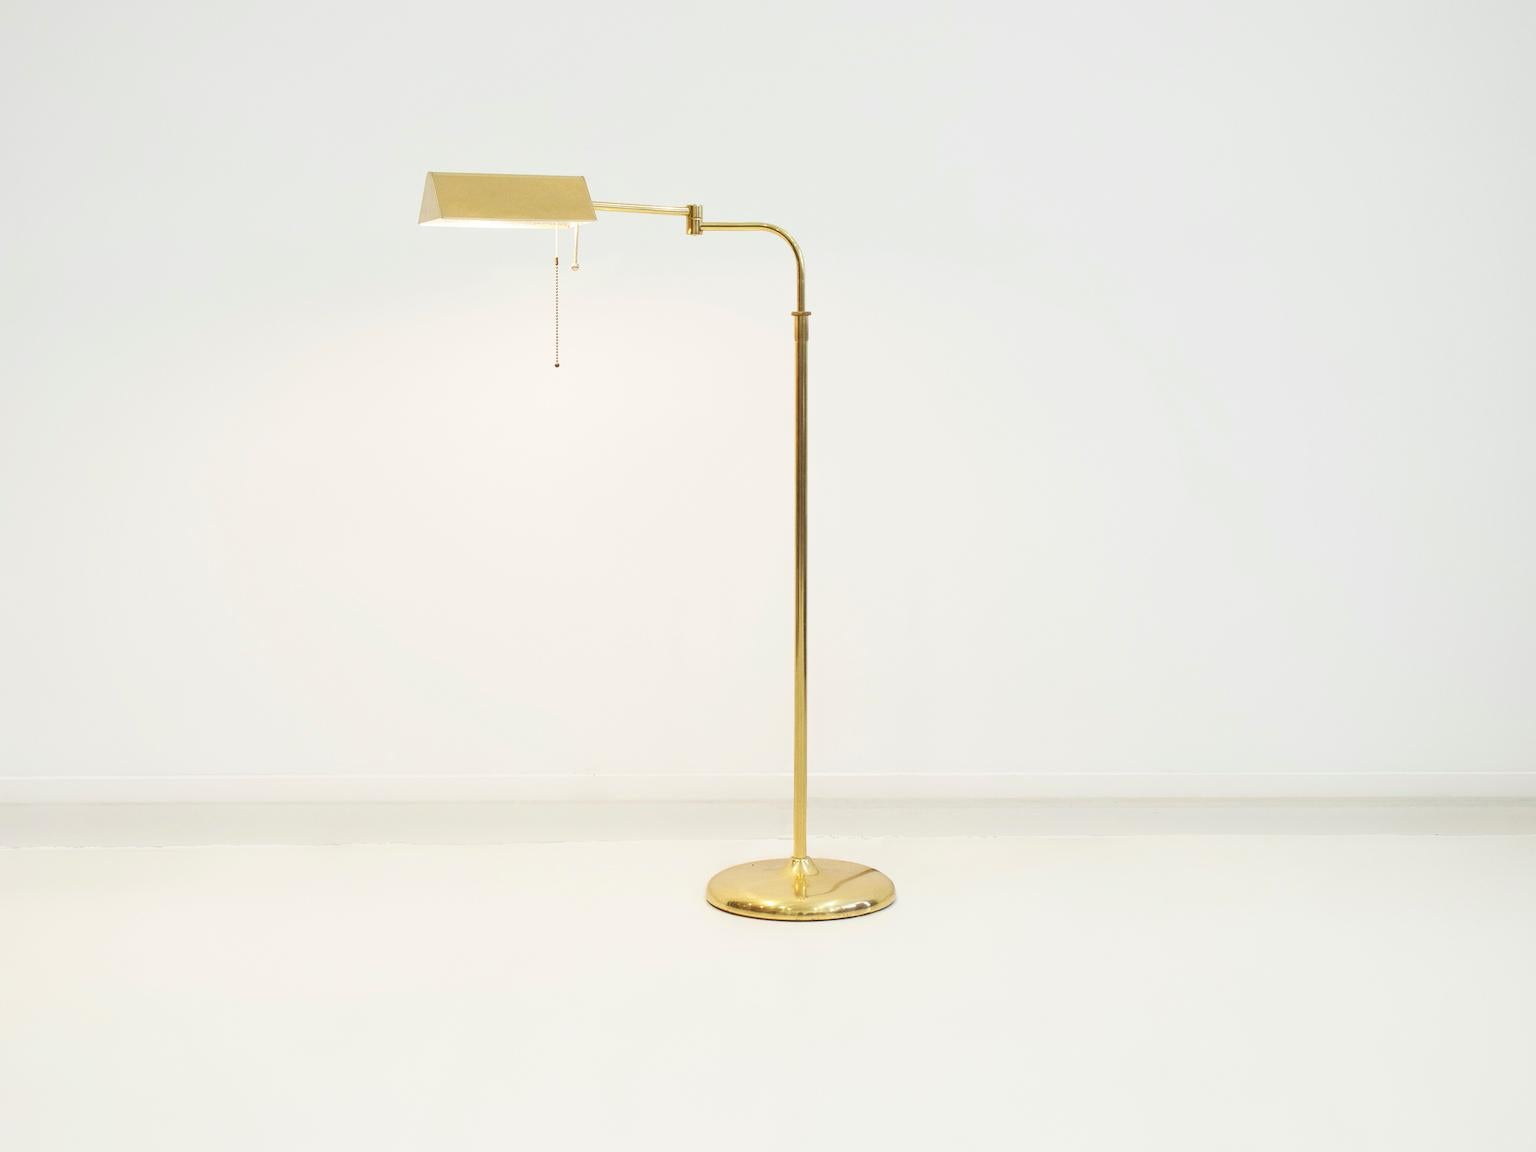 'Banker' floor lamp from the 1970s. Brass construction with round stand, height-adjustable arm and a swiveling shade, equipped with one light point and a pull switch. Height can be adjusted from 100 to 155 cm.